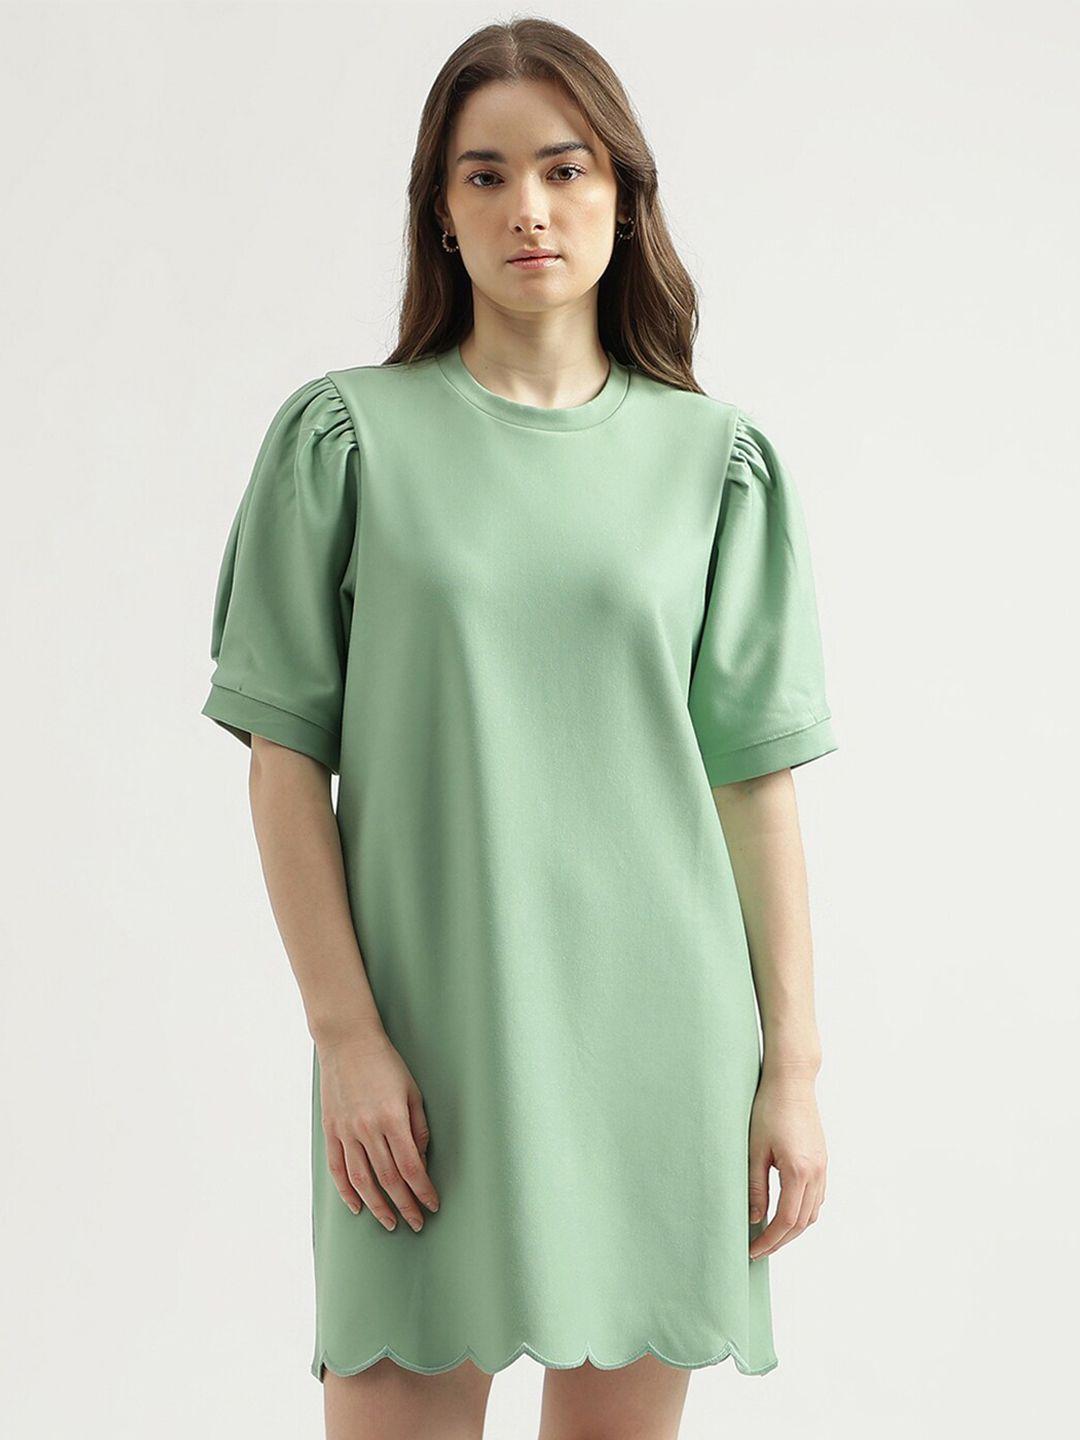 united-colors-of-benetton-puff-sleeves-scalloped-hem-a-line-dress